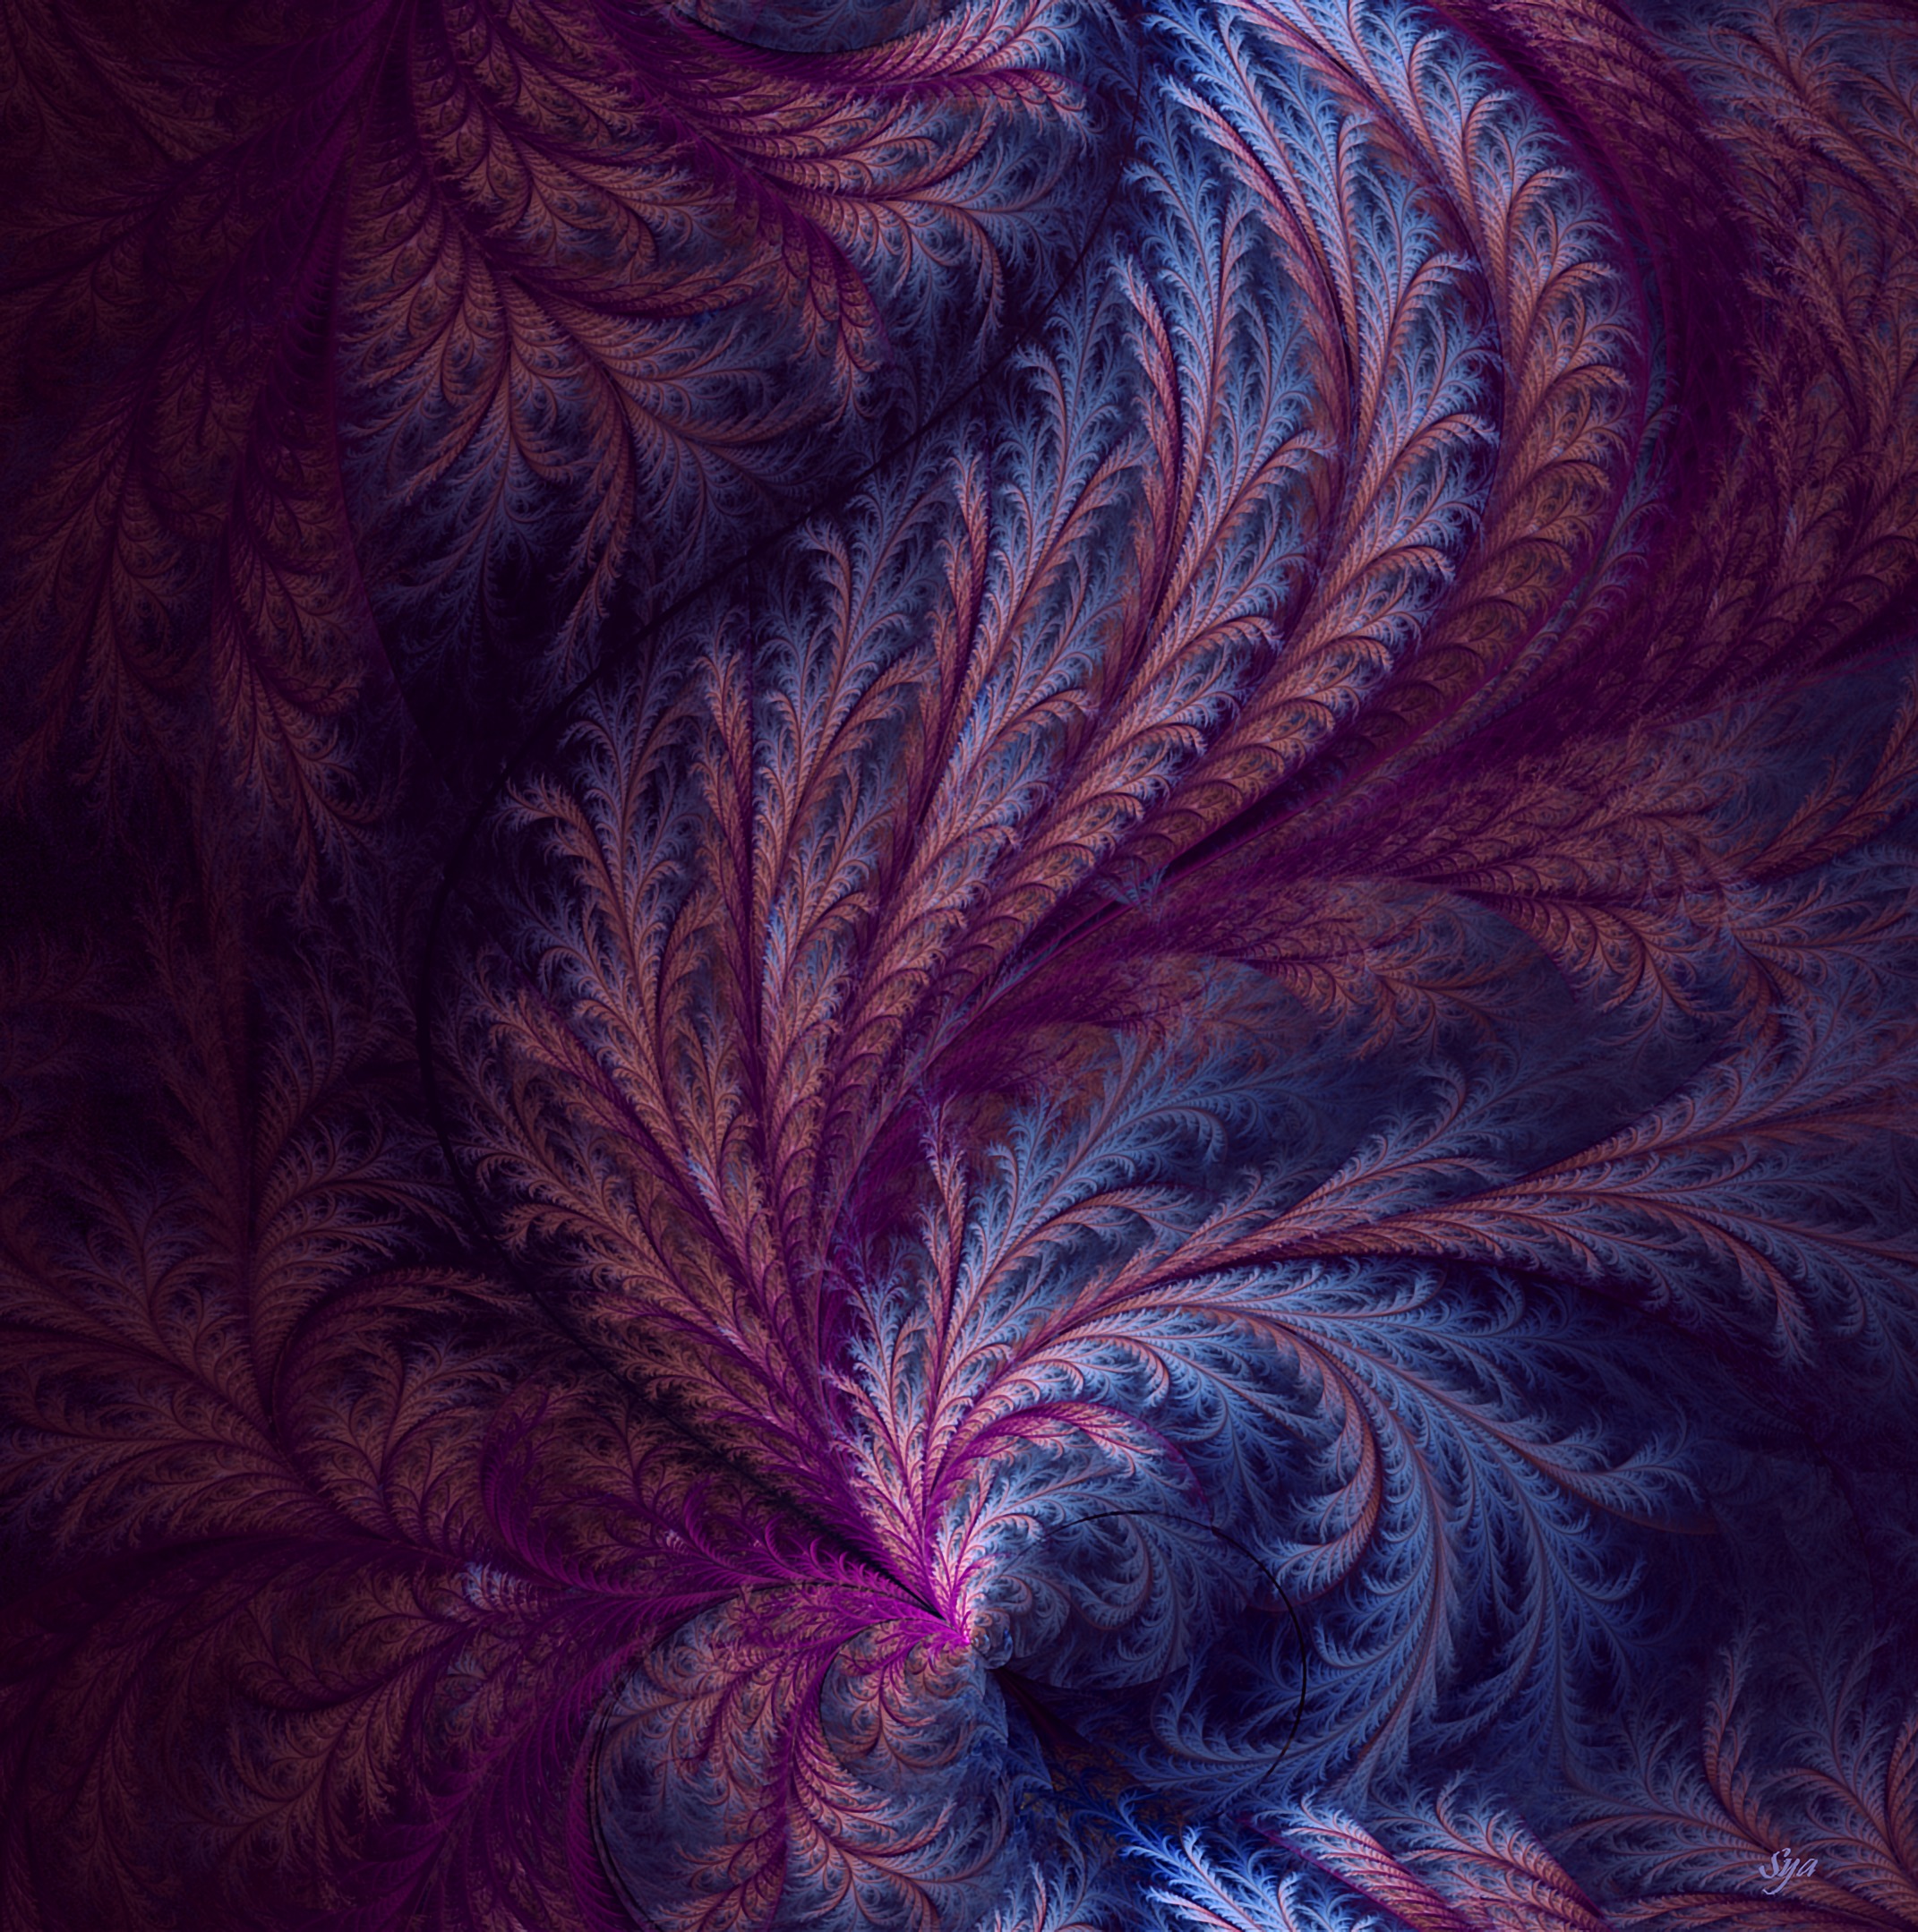 HD wallpaper fractal, pattern, intricate, confused, branchy, abstract, branched